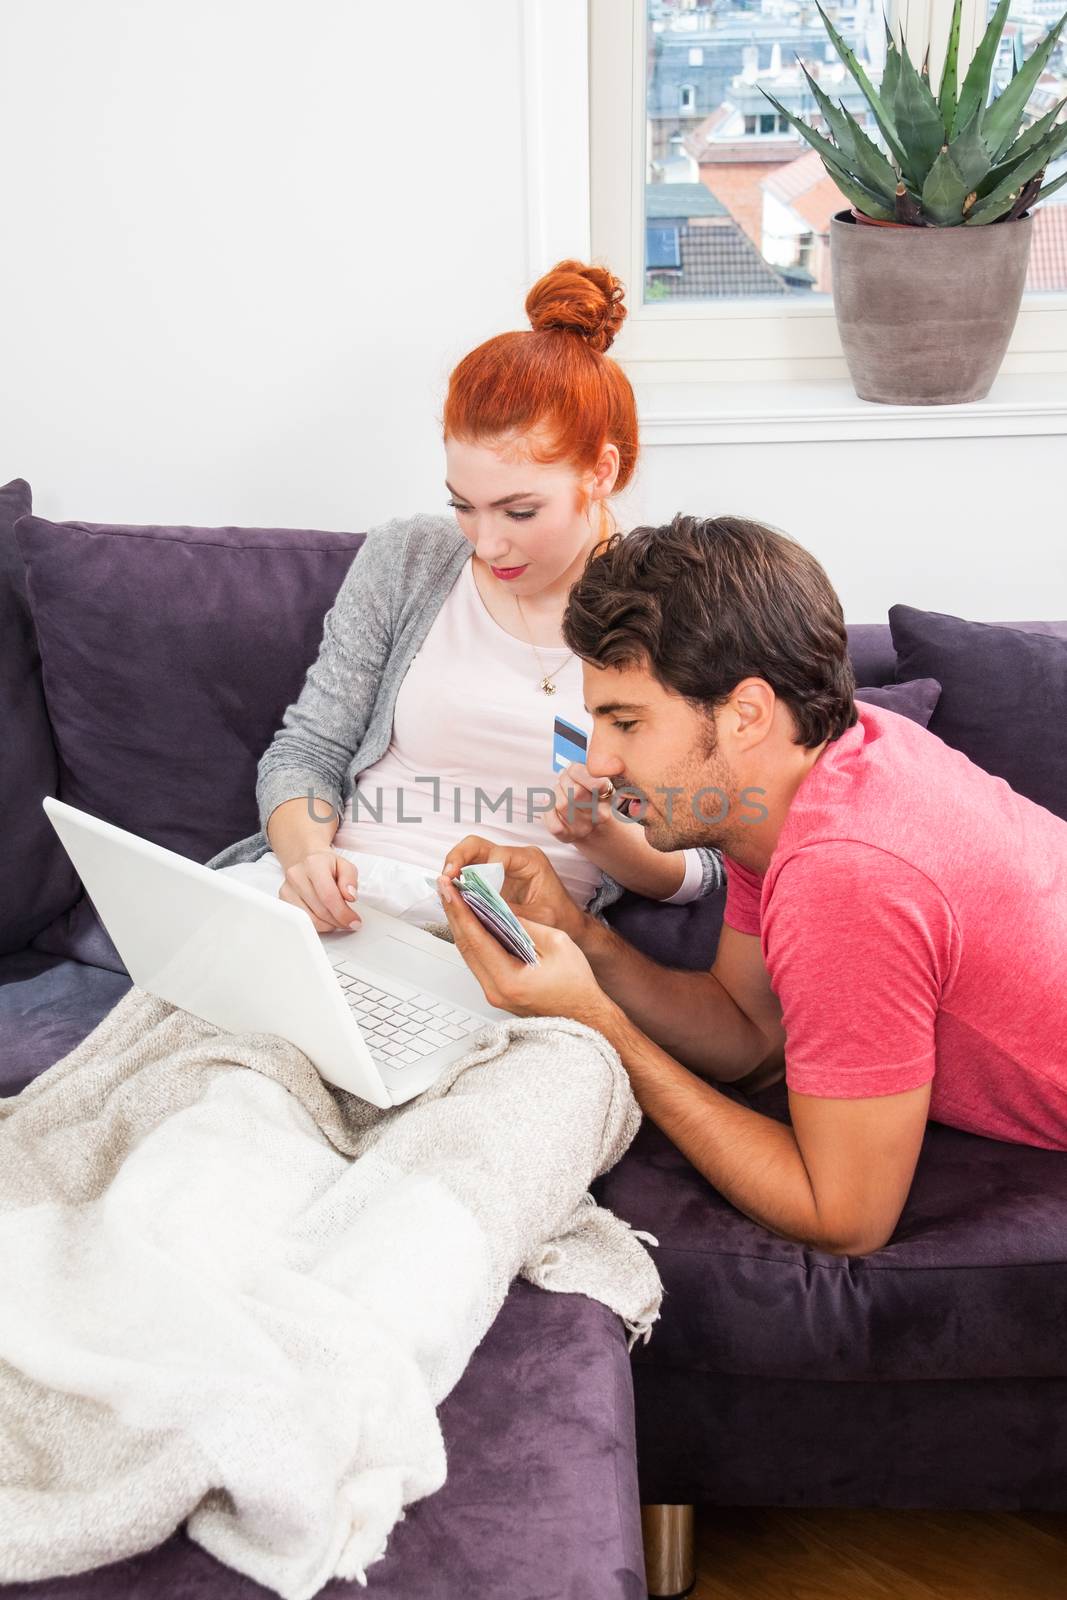 Sweet Young Couple Relaxing on the Couch in the Living Room, Watching a Movie on Laptop Computer Together.